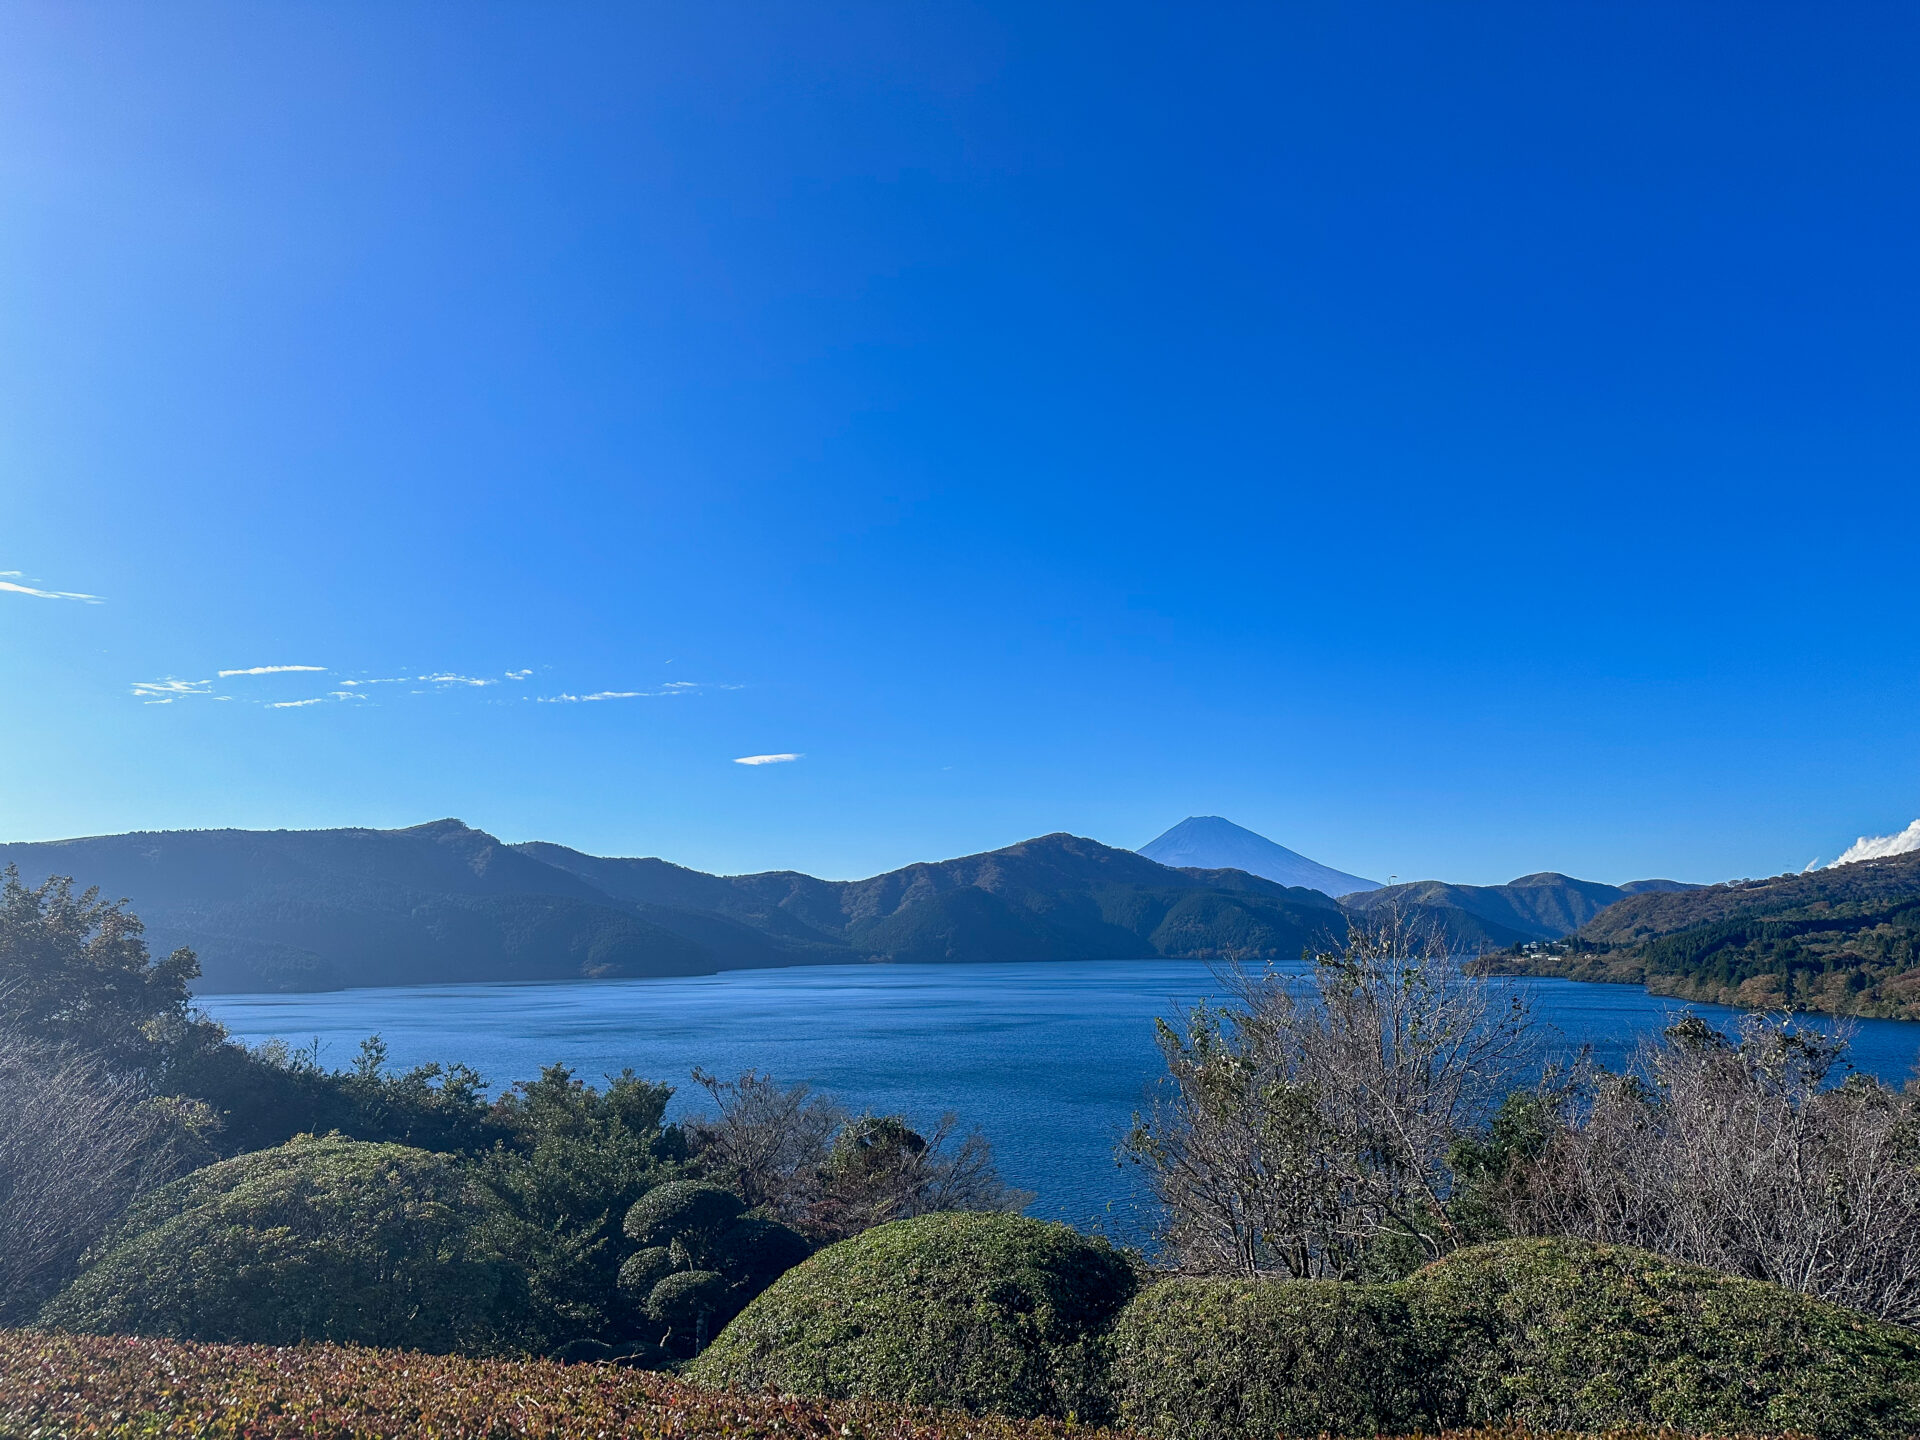 A guide to visiting Hakone